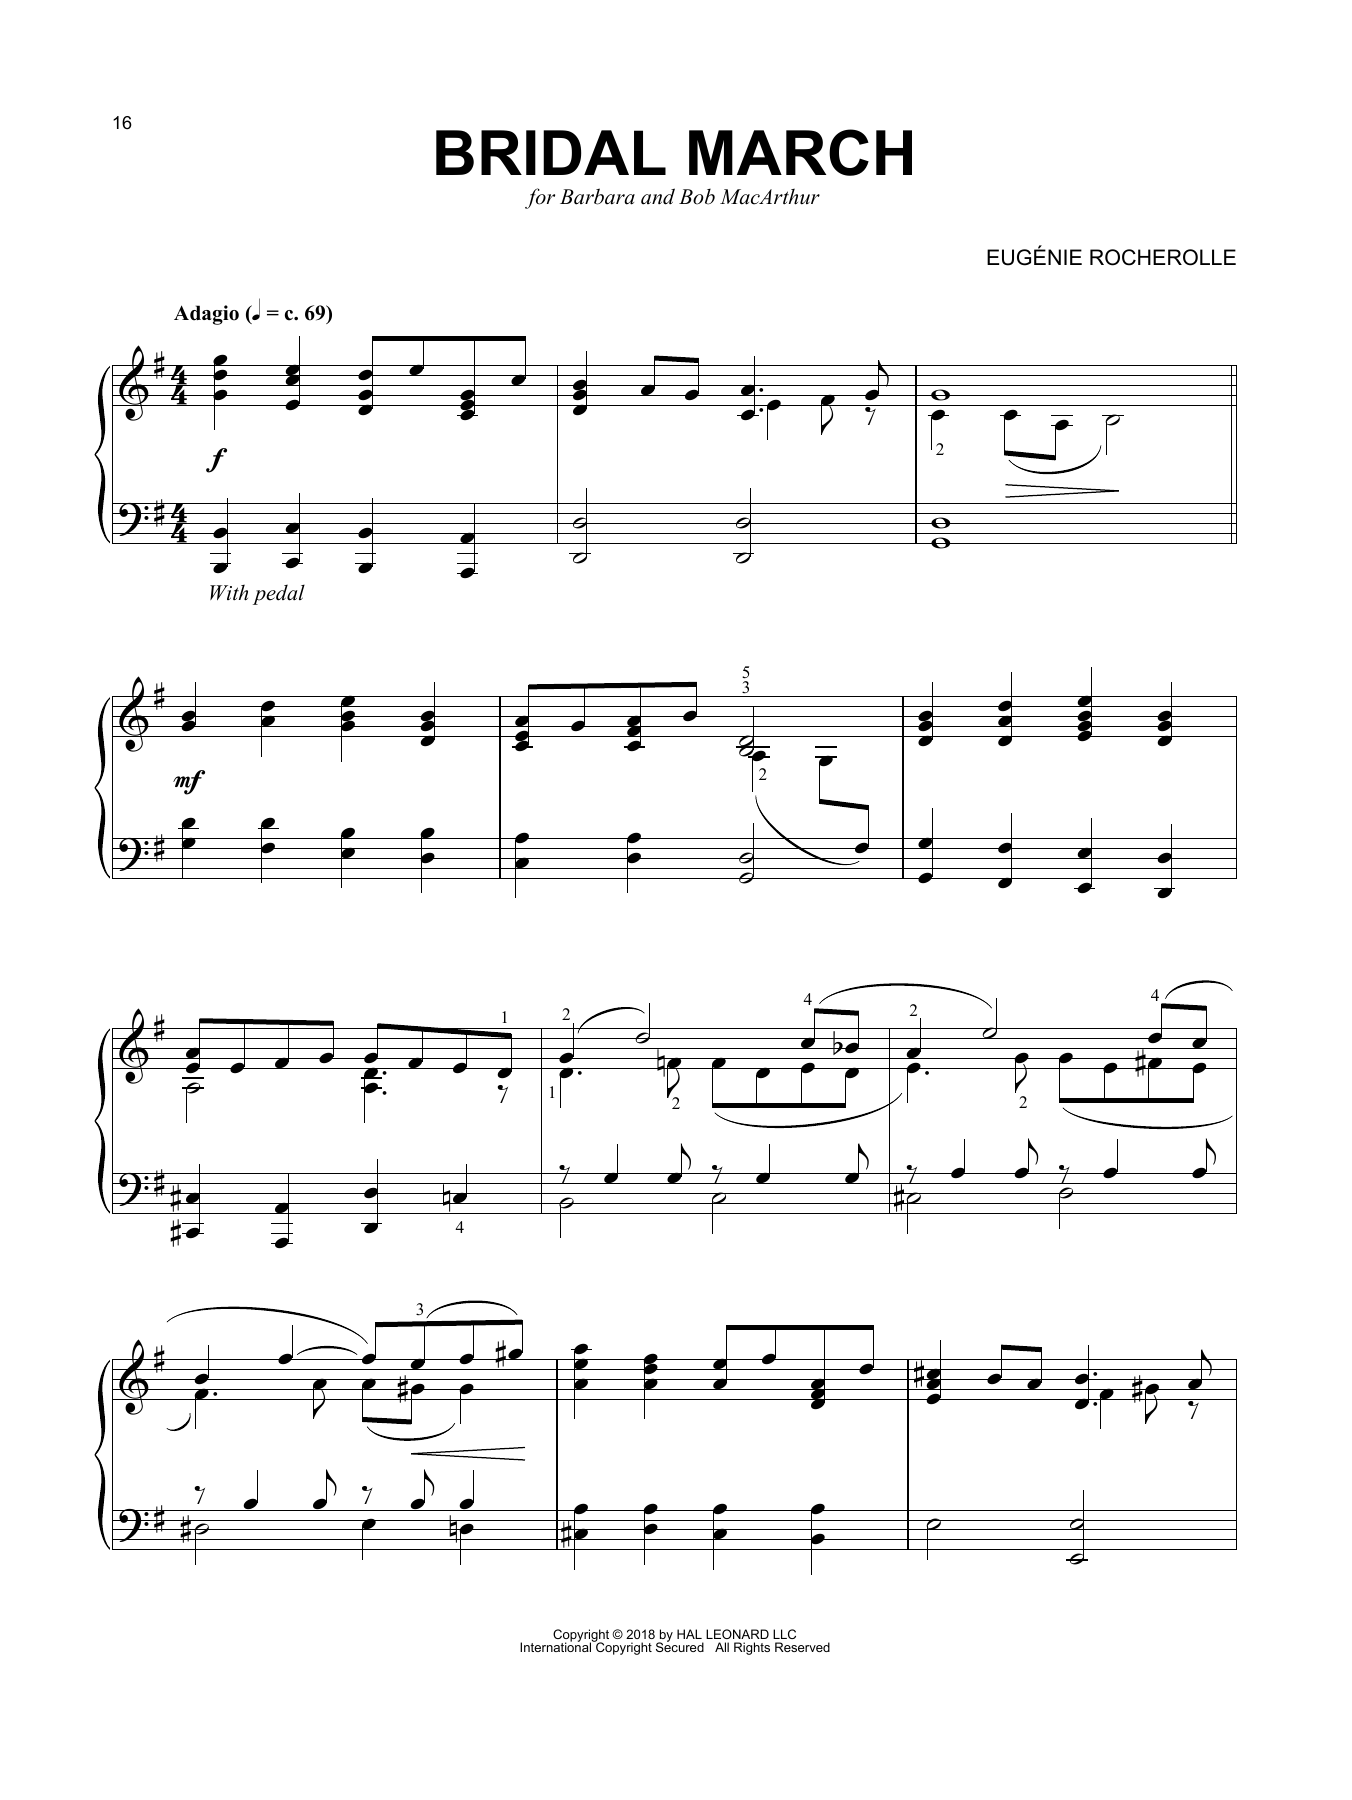 Download Eugenie Rocherolle Bridal March Sheet Music